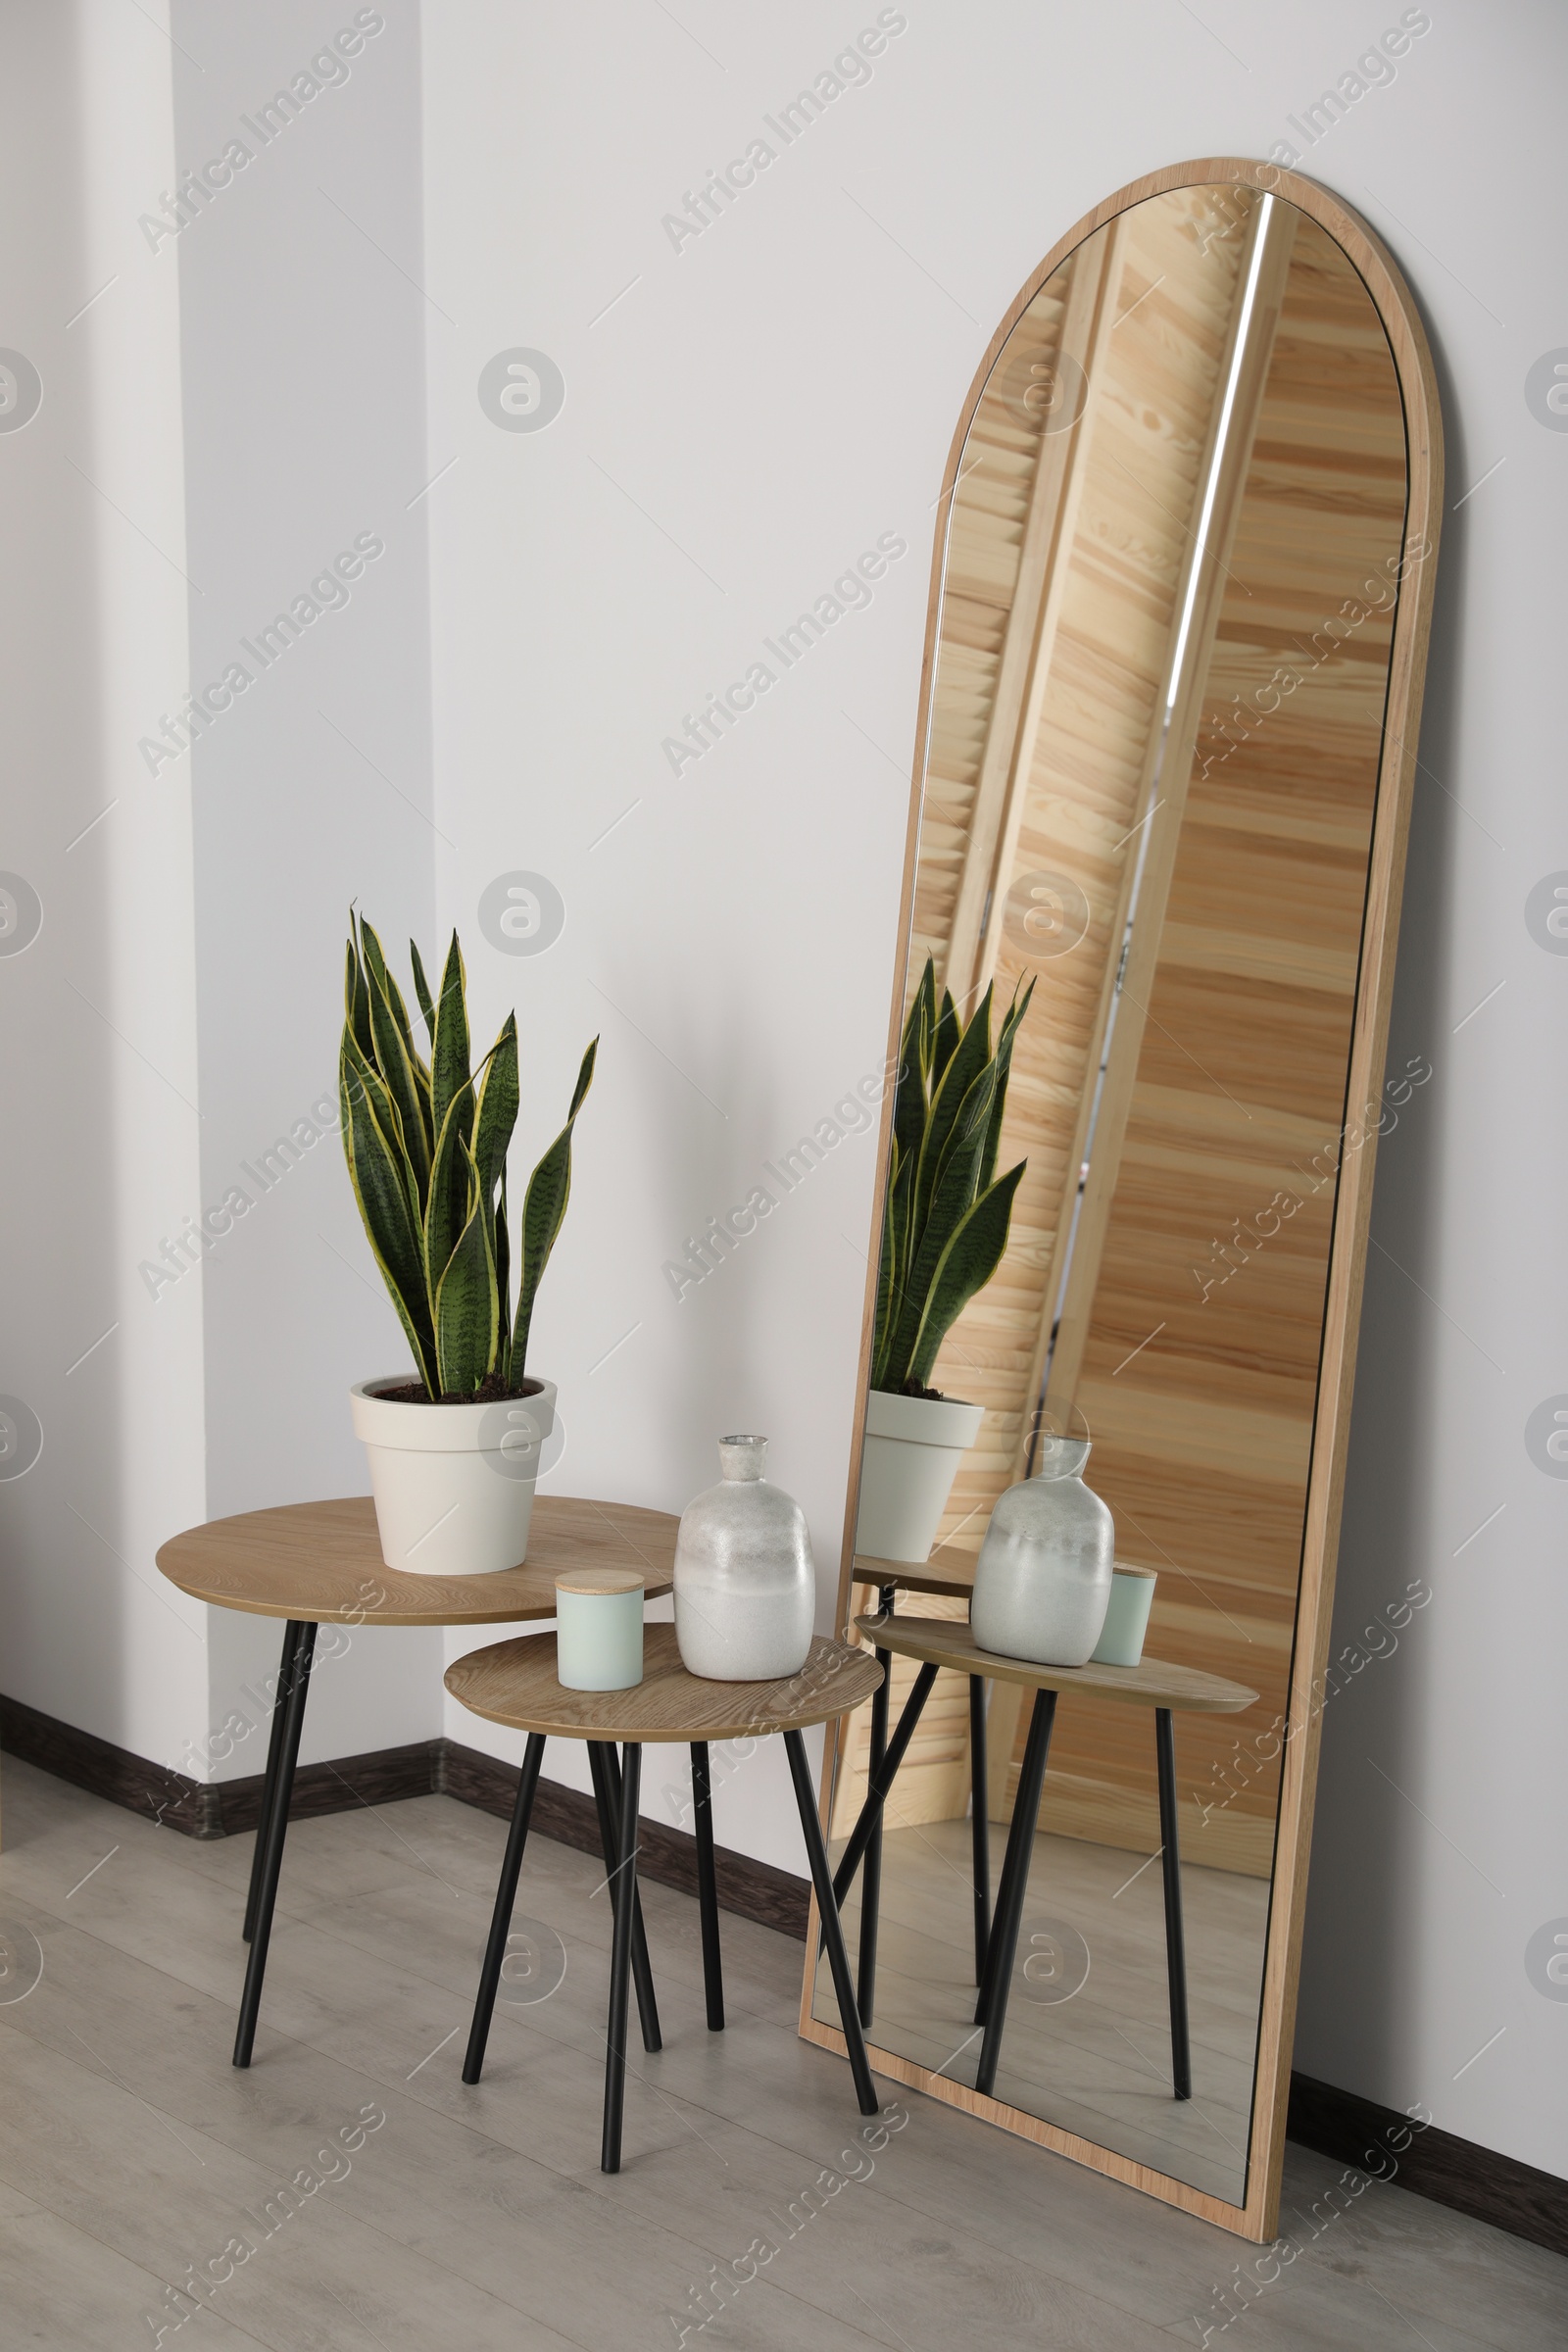 Photo of Leaning floor mirror near nesting tables with houseplant and decor in room